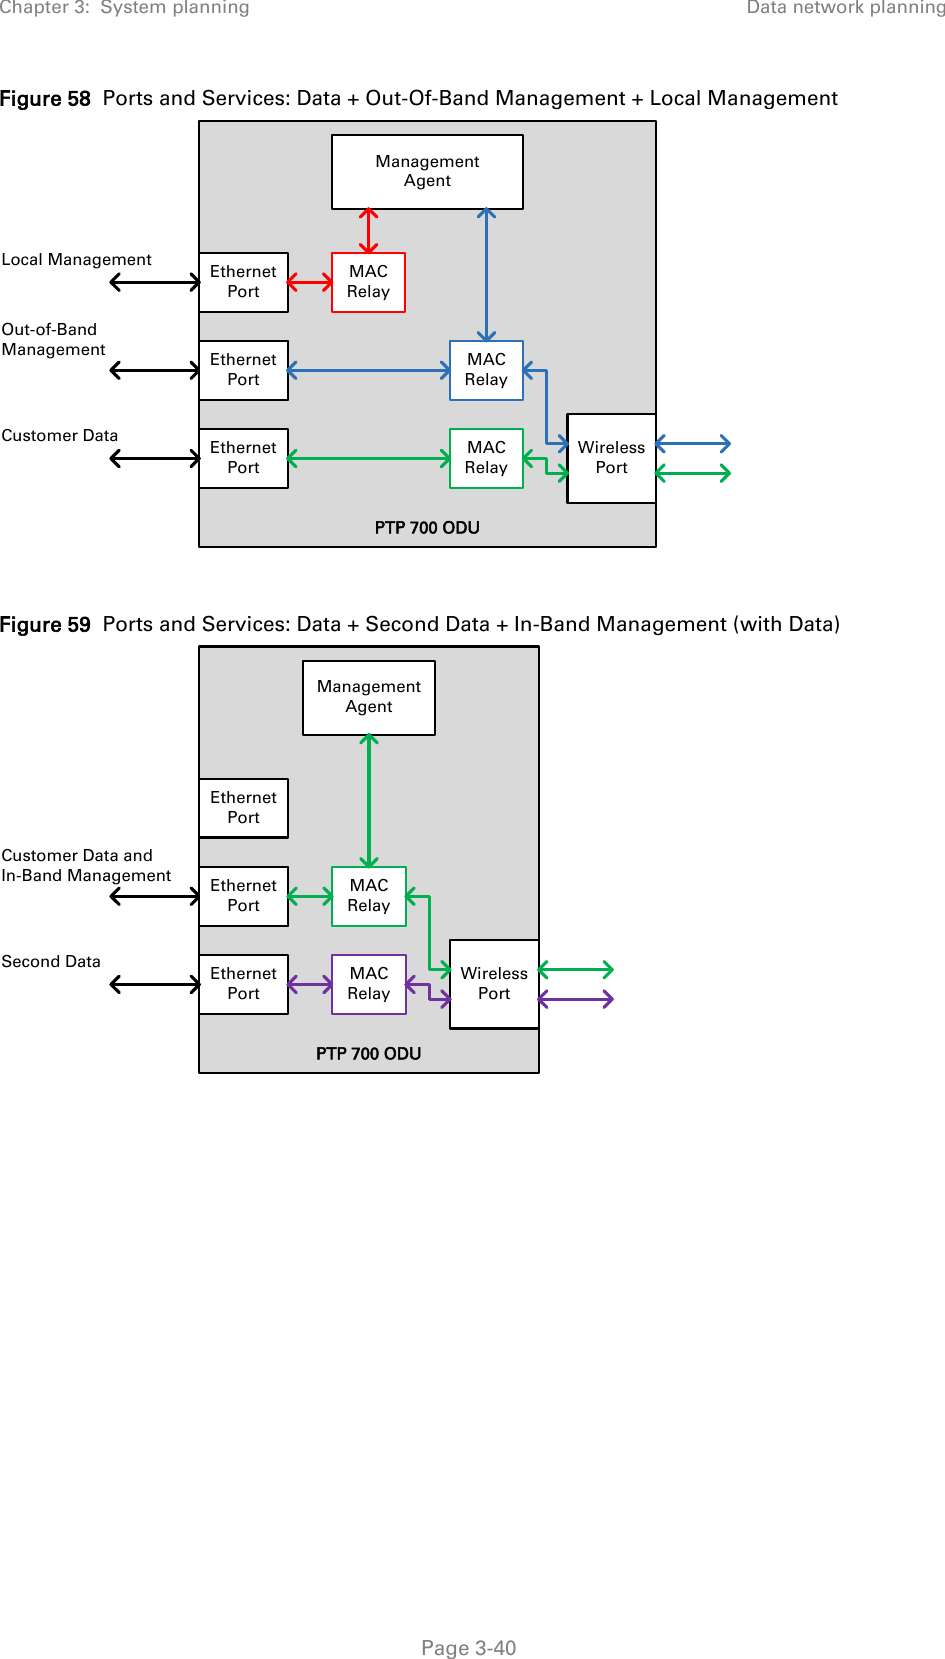 Chapter 3:  System planning Data network planning  Figure 58  Ports and Services: Data + Out-Of-Band Management + Local Management   Figure 59  Ports and Services: Data + Second Data + In-Band Management (with Data)   PTP 700 ODUManagementAgentEthernetPortEthernetPortEthernetPortMAC RelayLocal ManagementMAC RelayCustomer DataEthernetPortMAC RelayOut-of-Band ManagementWirelessPortPTP 700 ODUManagementAgentEthernetPortEthernetPortEthernetPortMAC RelaySecond DataEthernetPortMAC RelayCustomer Data andIn-Band ManagementWirelessPort Page 3-40 